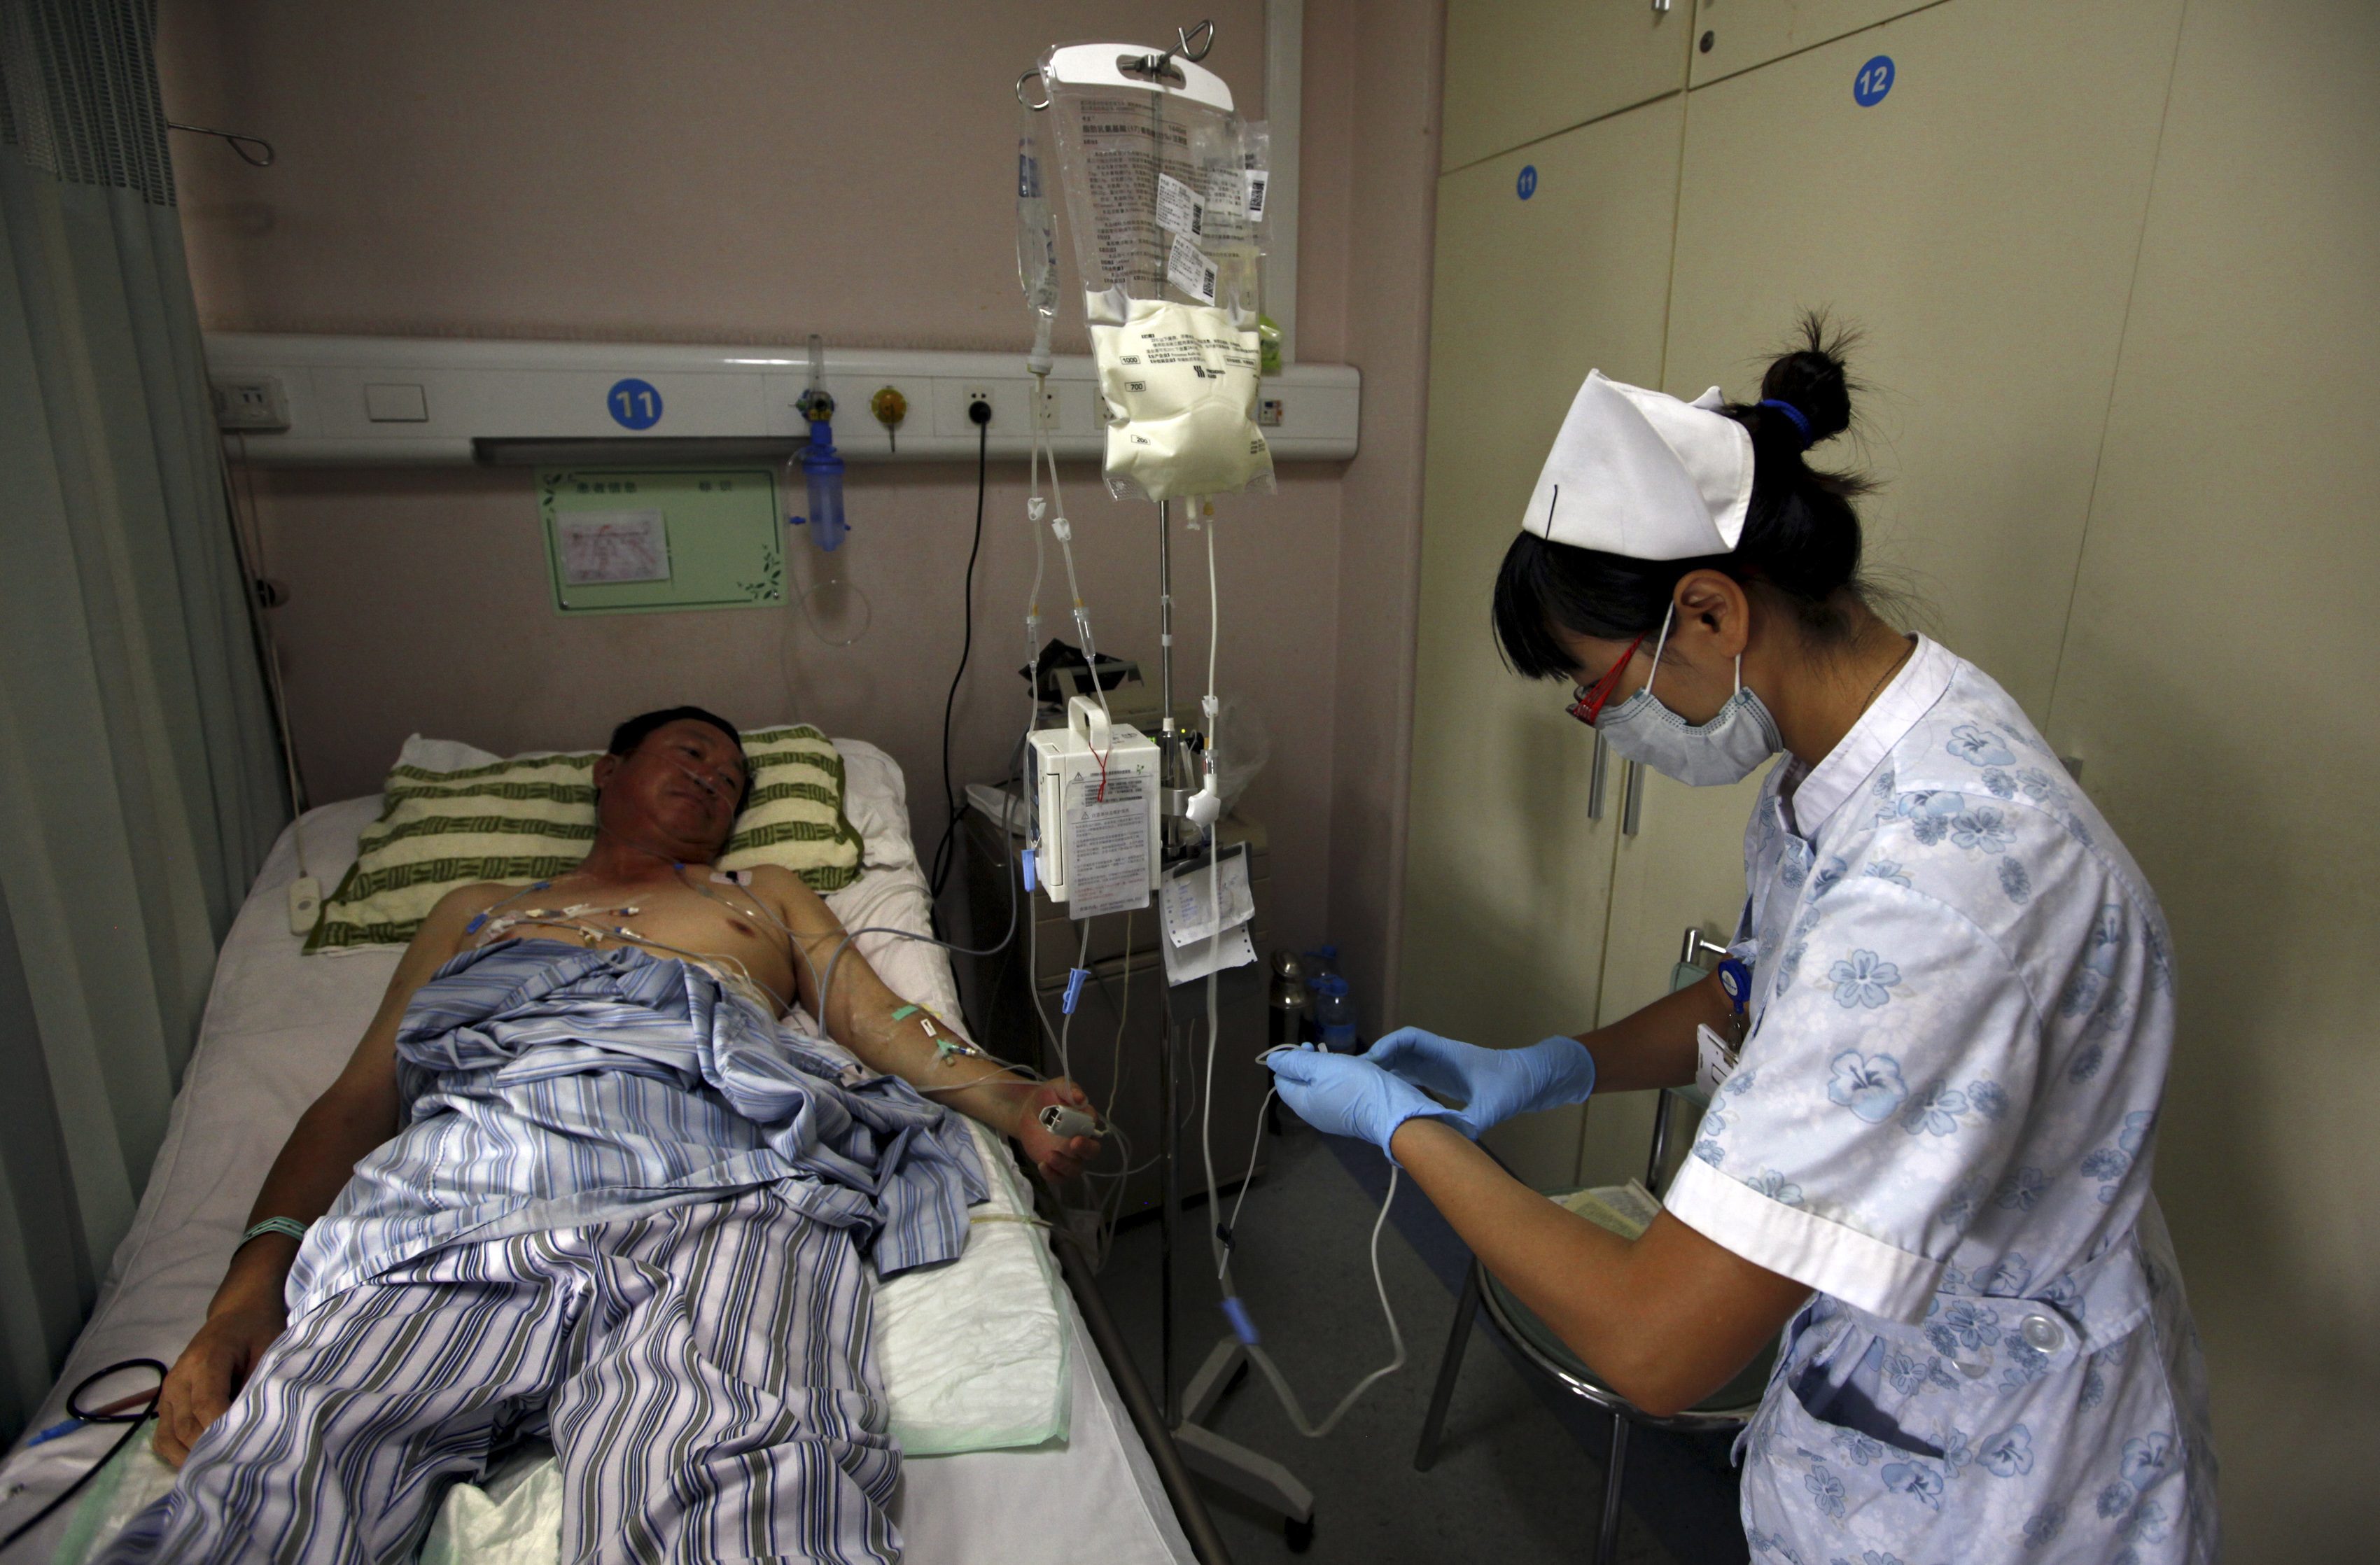 A nurse prepares to inject a cancer patient with medicine as she performs her daily rounds at the Beijing Cancer Hospital in this file photo from 2011. Cancer is spreading in China and kills millions annually (David Gray—Reuters)